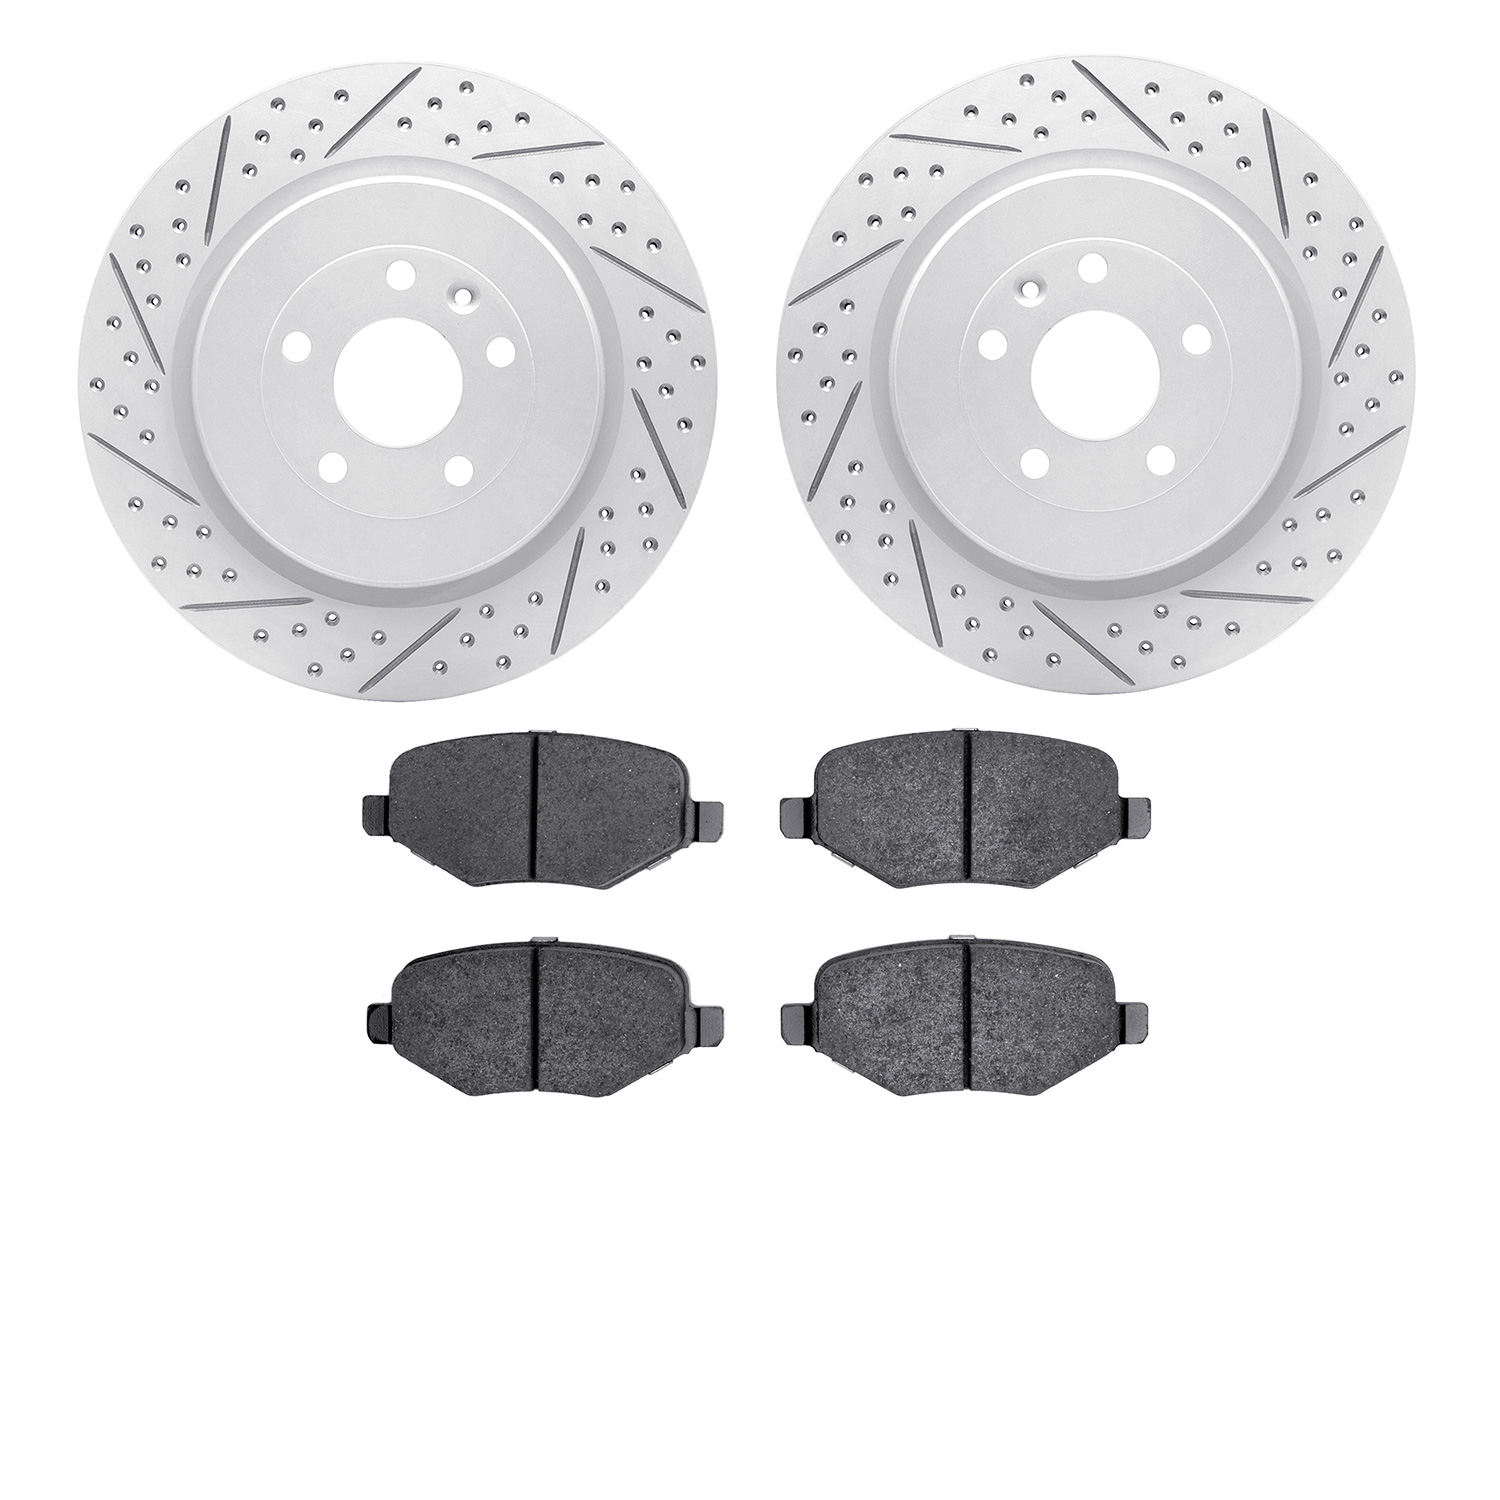 2502-54213 Geoperformance Drilled/Slotted Rotors w/5000 Advanced Brake Pads Kit, 2013-2019 Ford/Lincoln/Mercury/Mazda, Position: